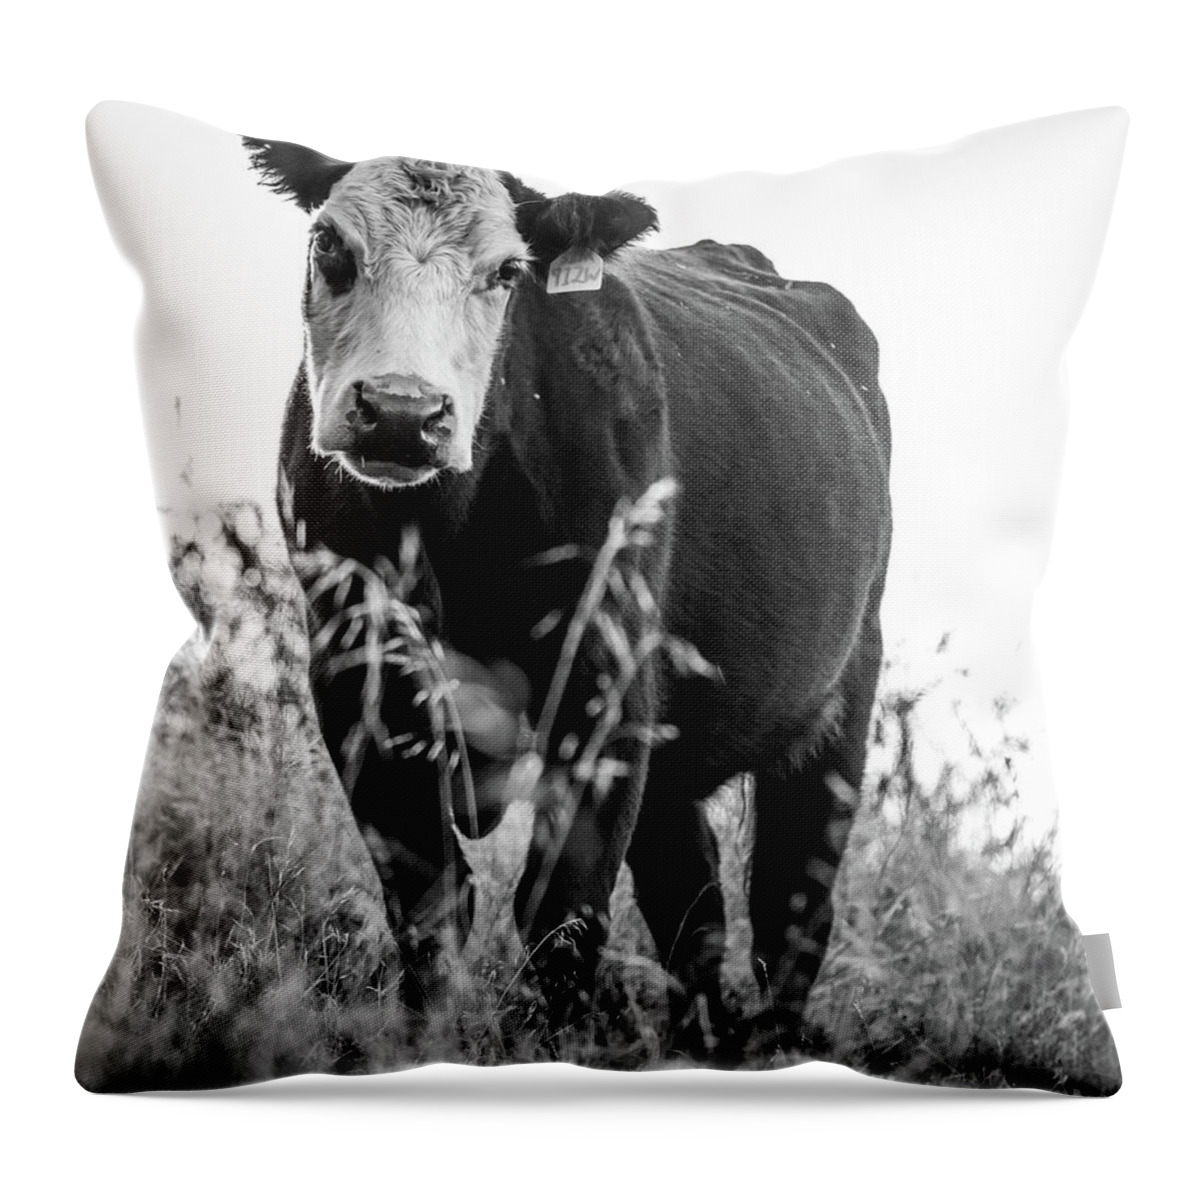 Cow Throw Pillow featuring the photograph Curious Cow by Vincent Bonafede